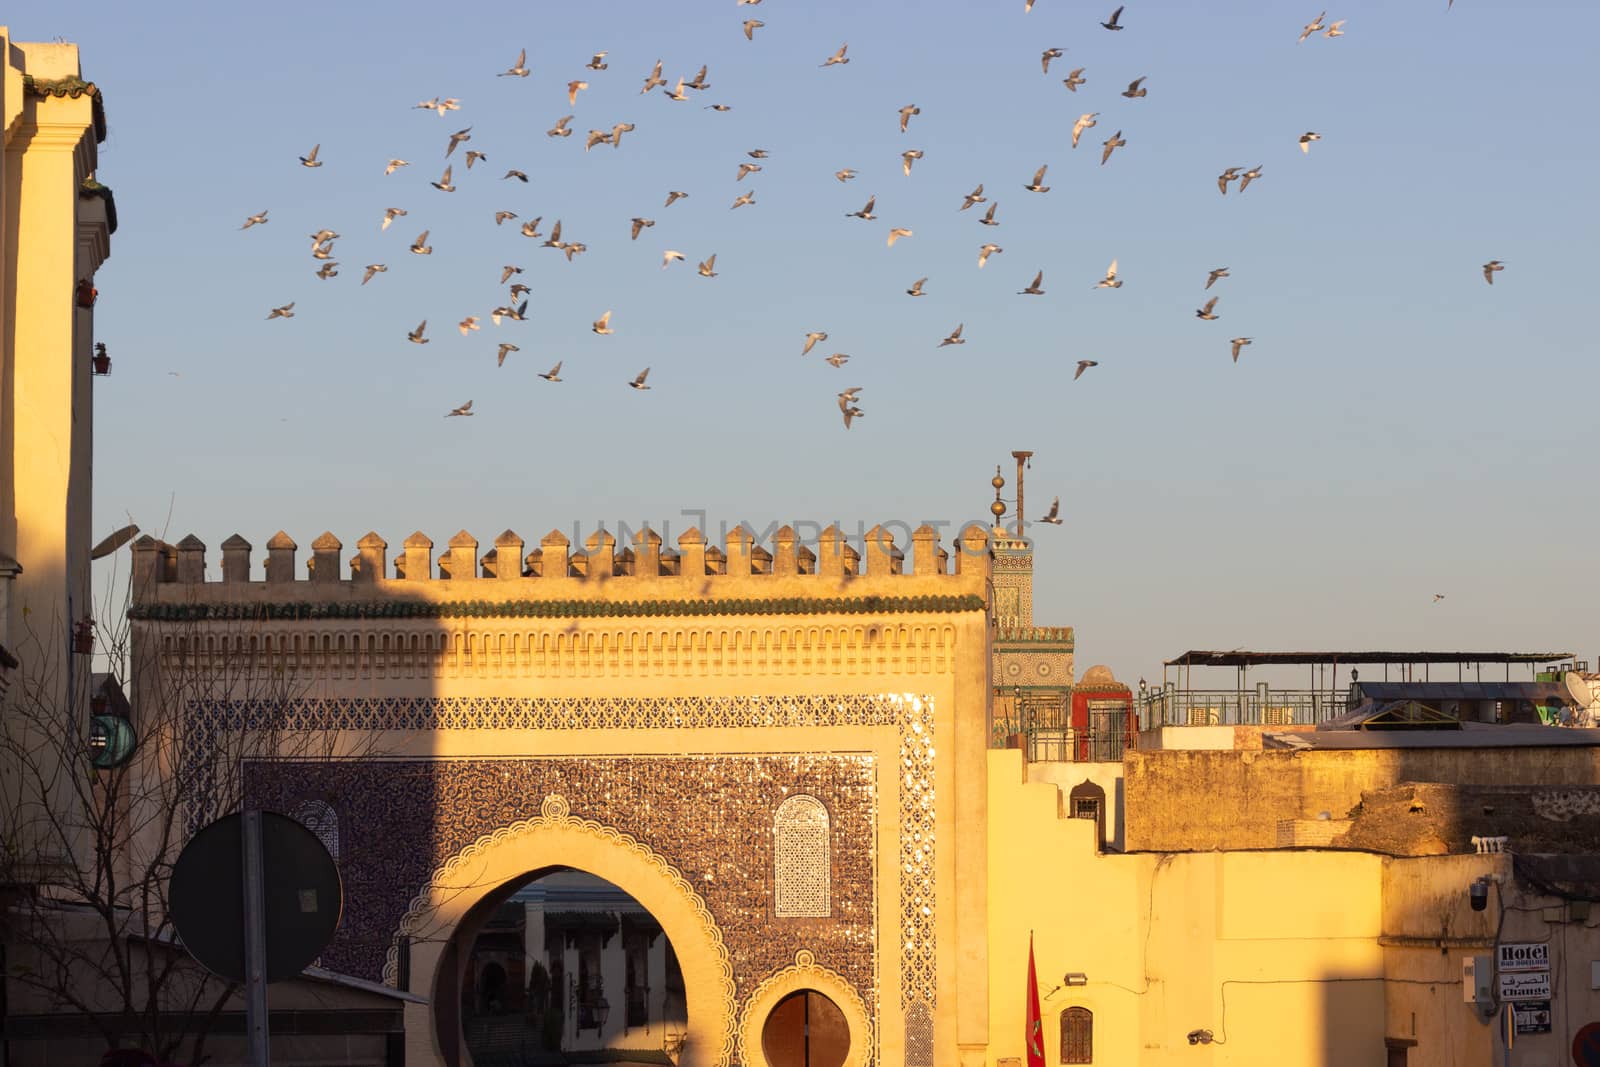 Bab Bou Jeloud gate (Blue Gate) - Fez, Morocco sunset with pigeons flying above by kgboxford